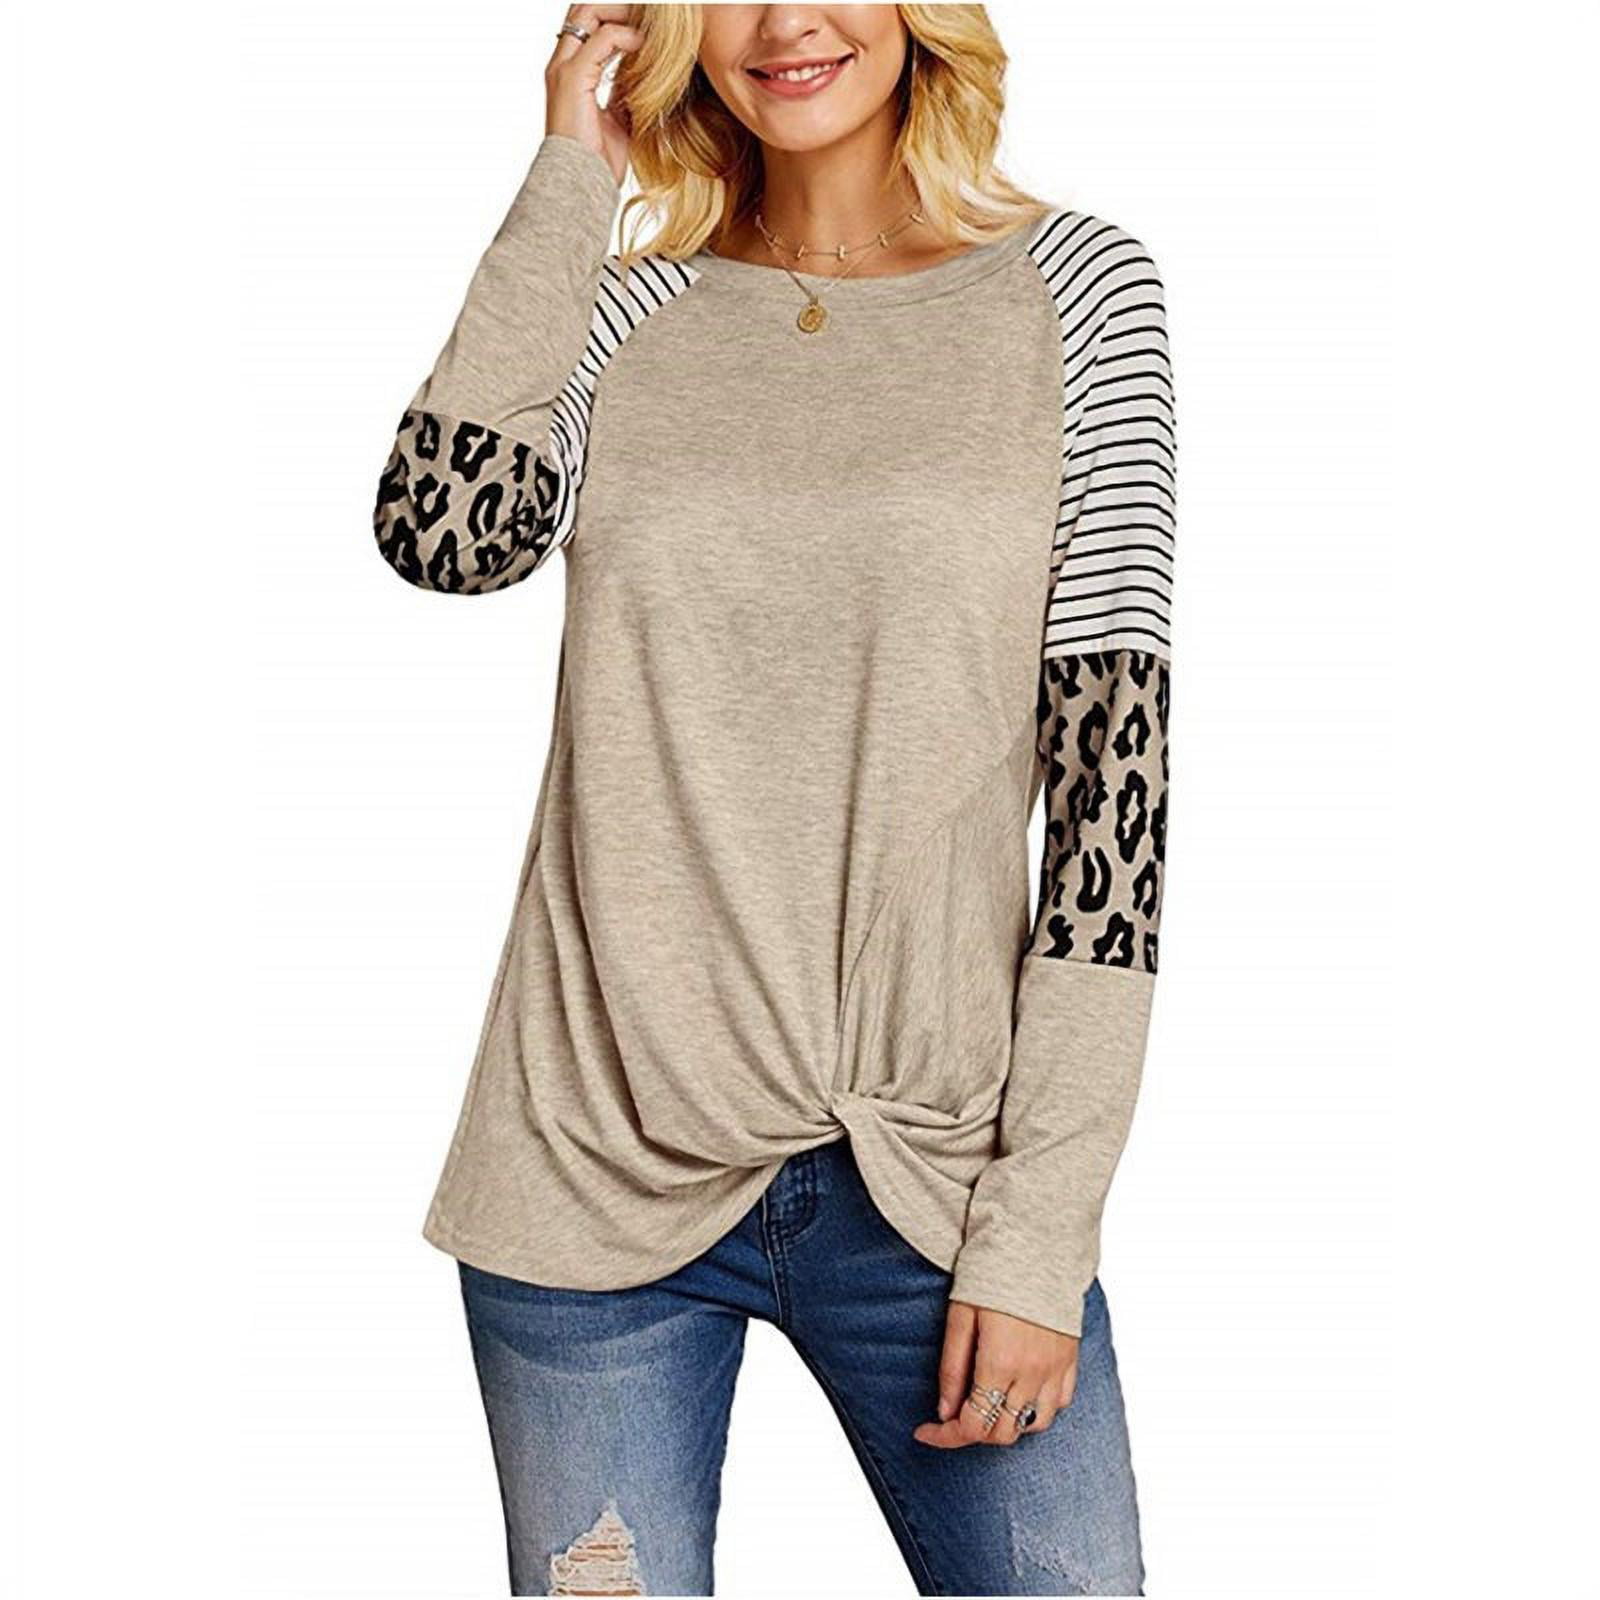 Floral Find Women's Long Sleeve Leopard Color Block Tunic Comfy Stripe Round Neck T Shirt Tops 